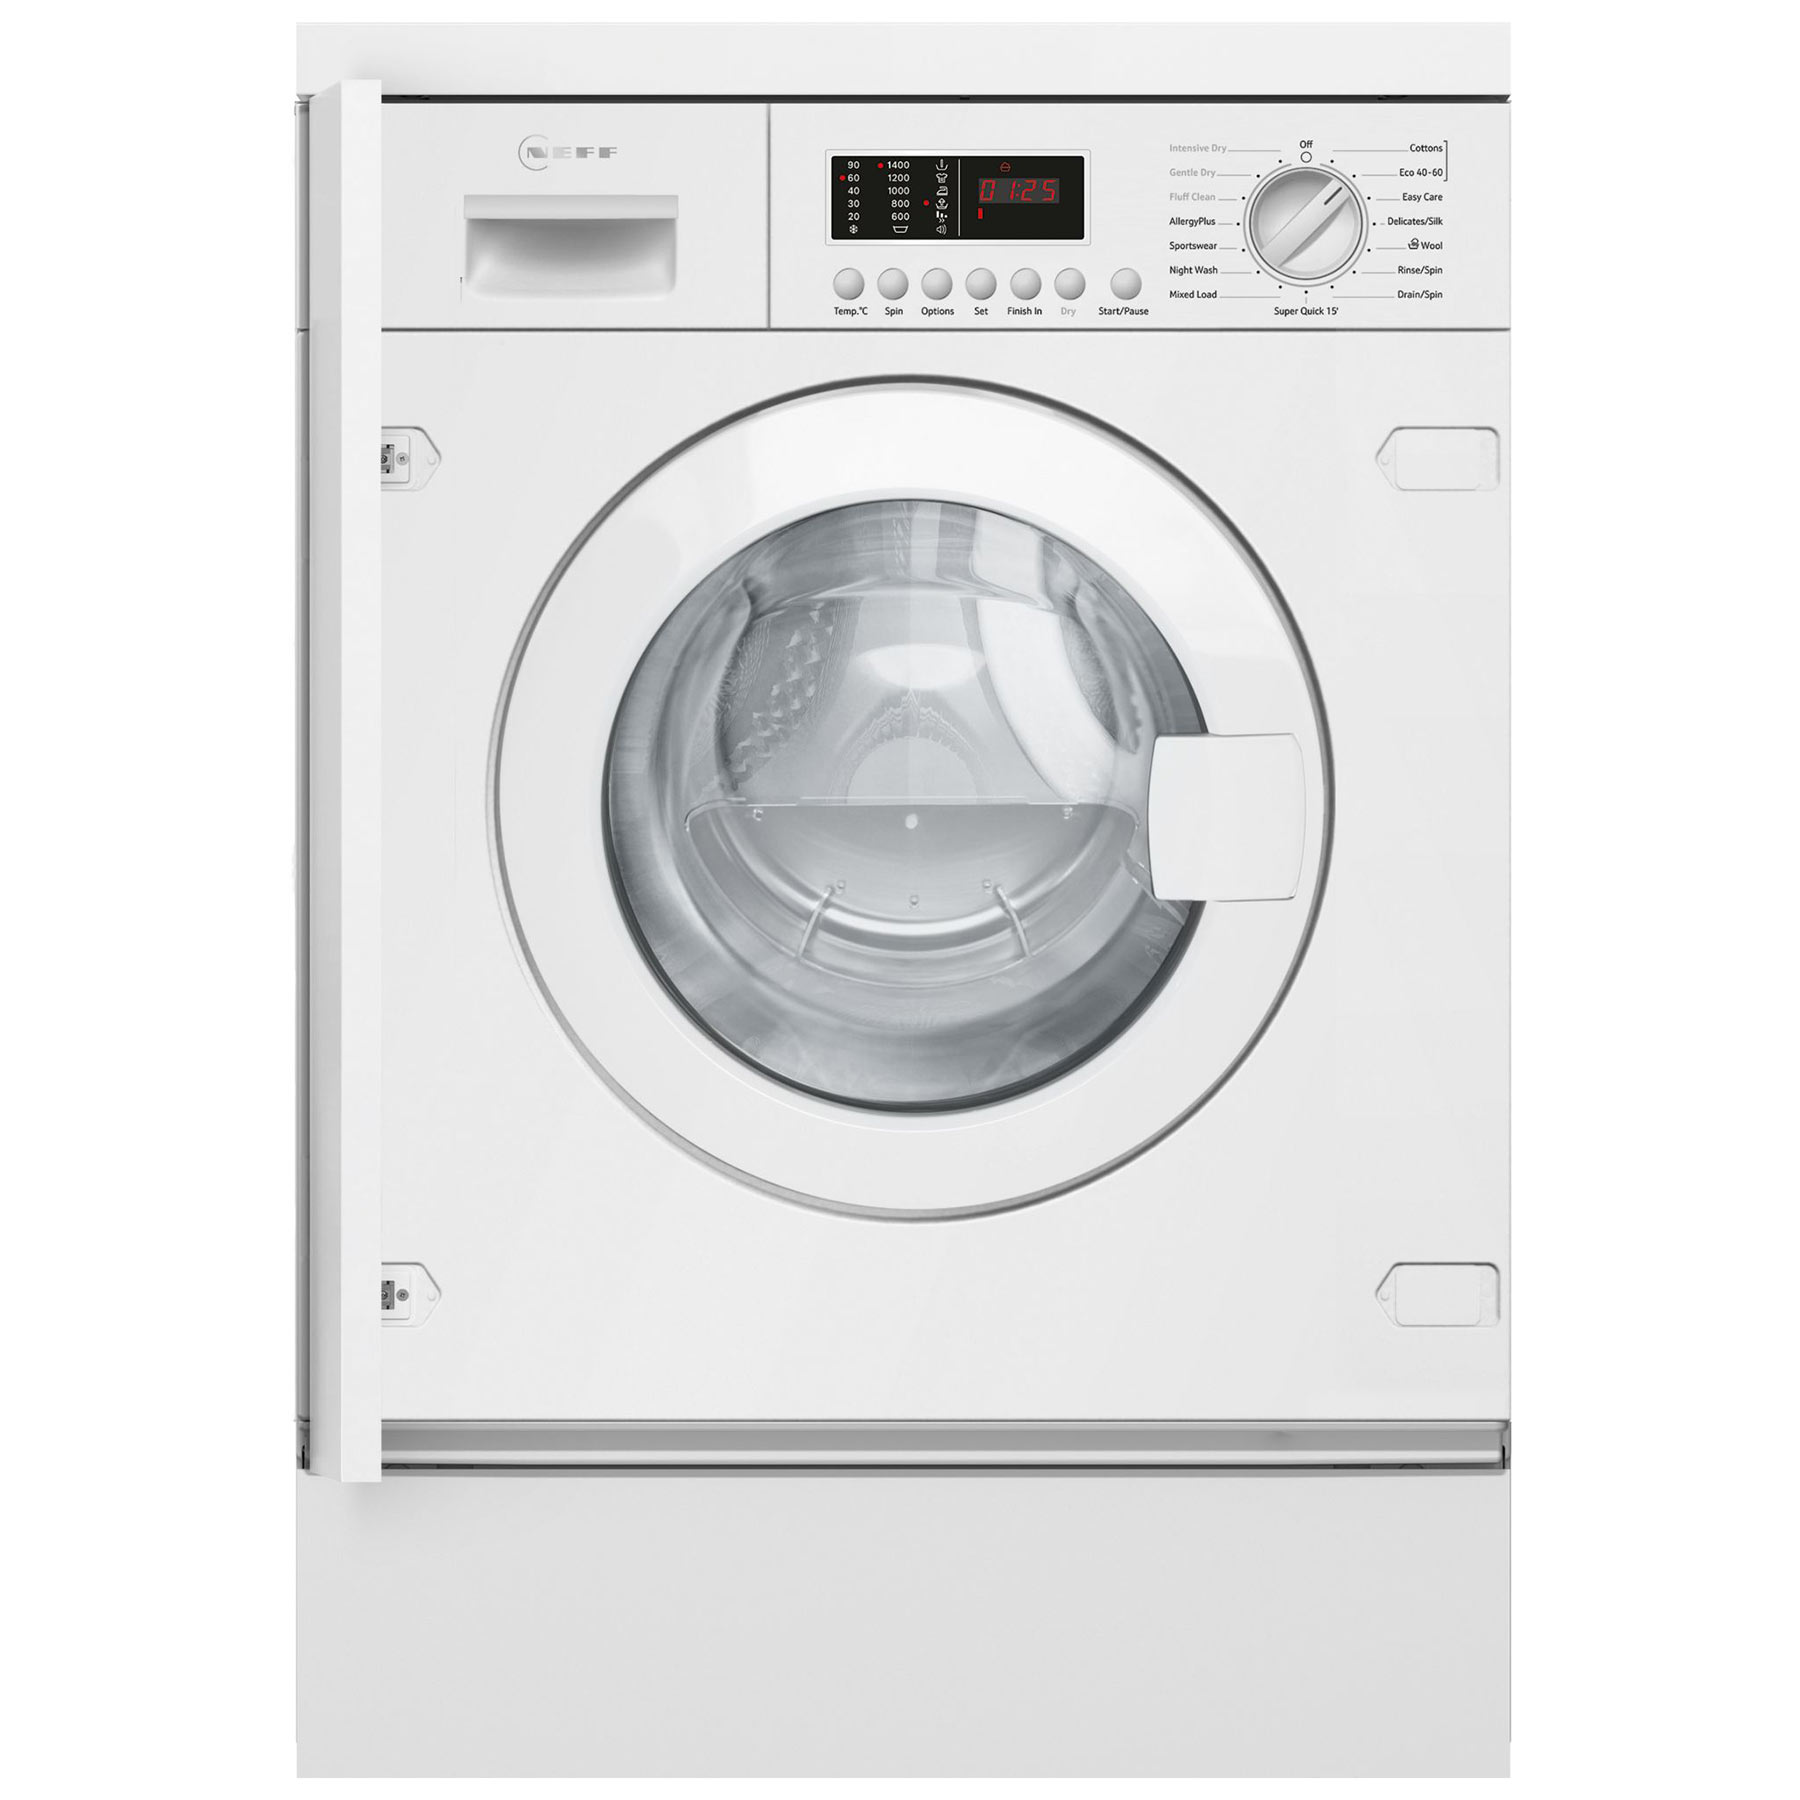 Image of Neff V6540X3GB Integrated Washer Dryer in White 1400rpm 7kg 4kg